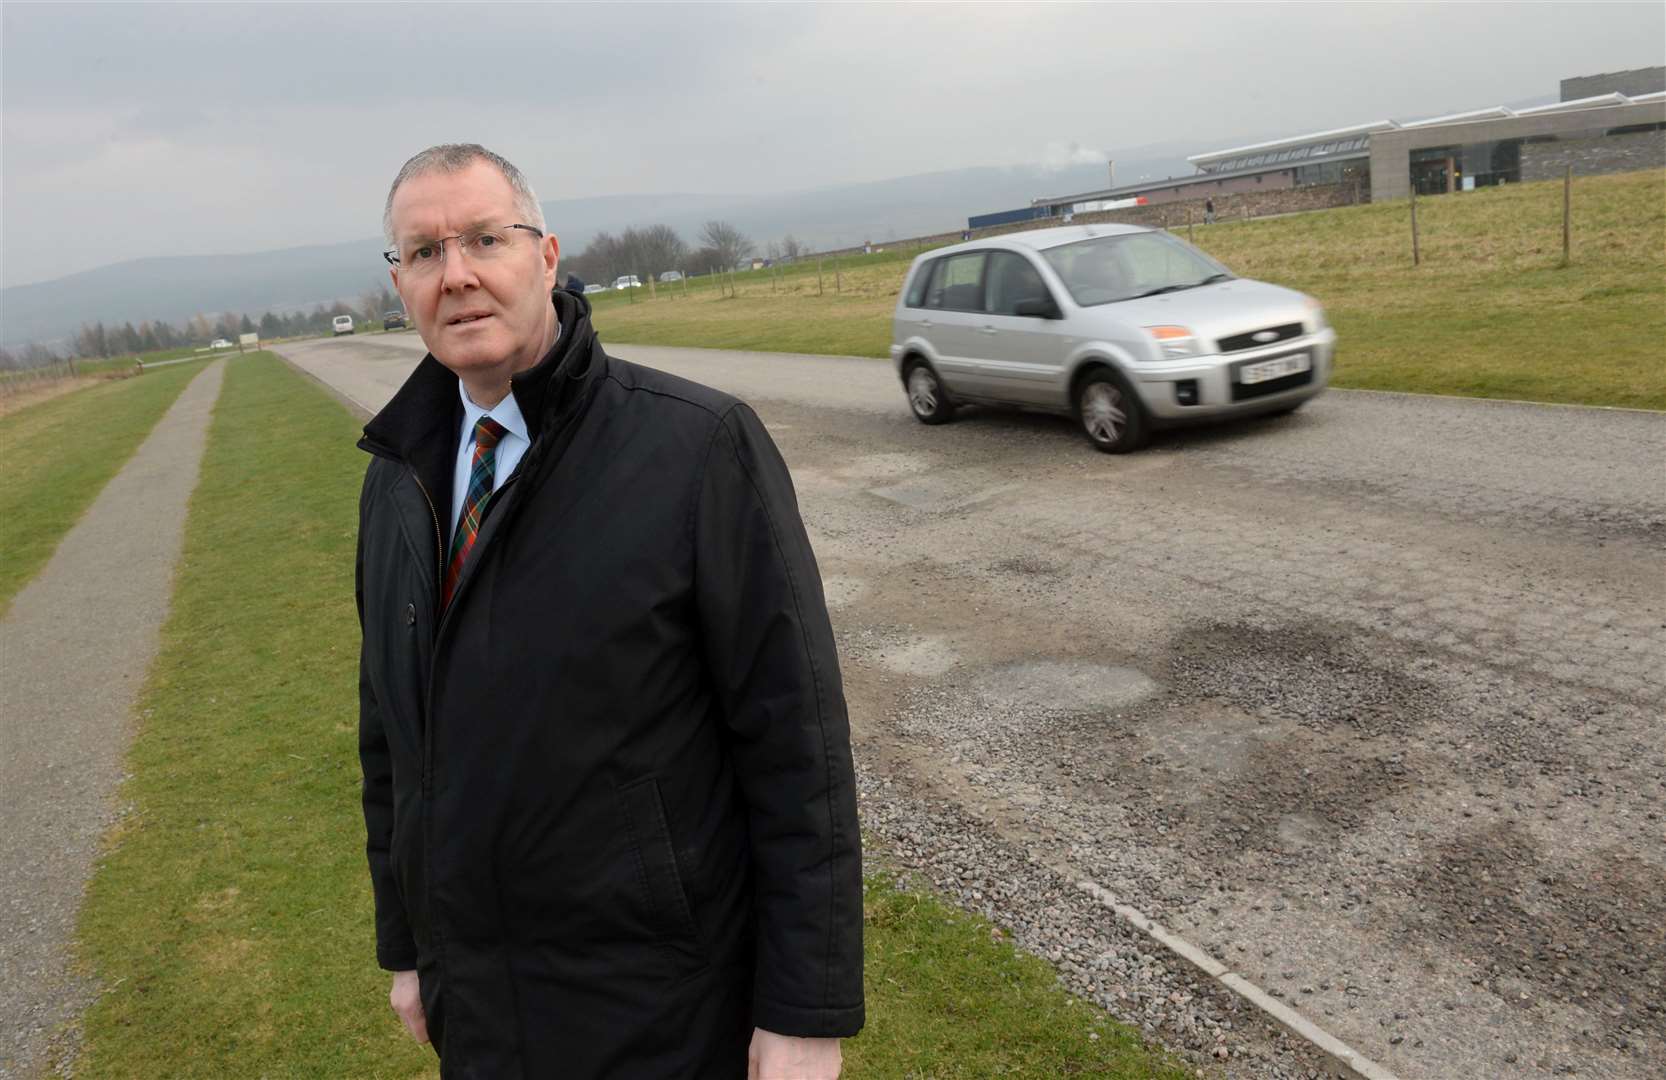 Councillor Duncan Macpherson at potholes on the road into Culloden Battlefield.